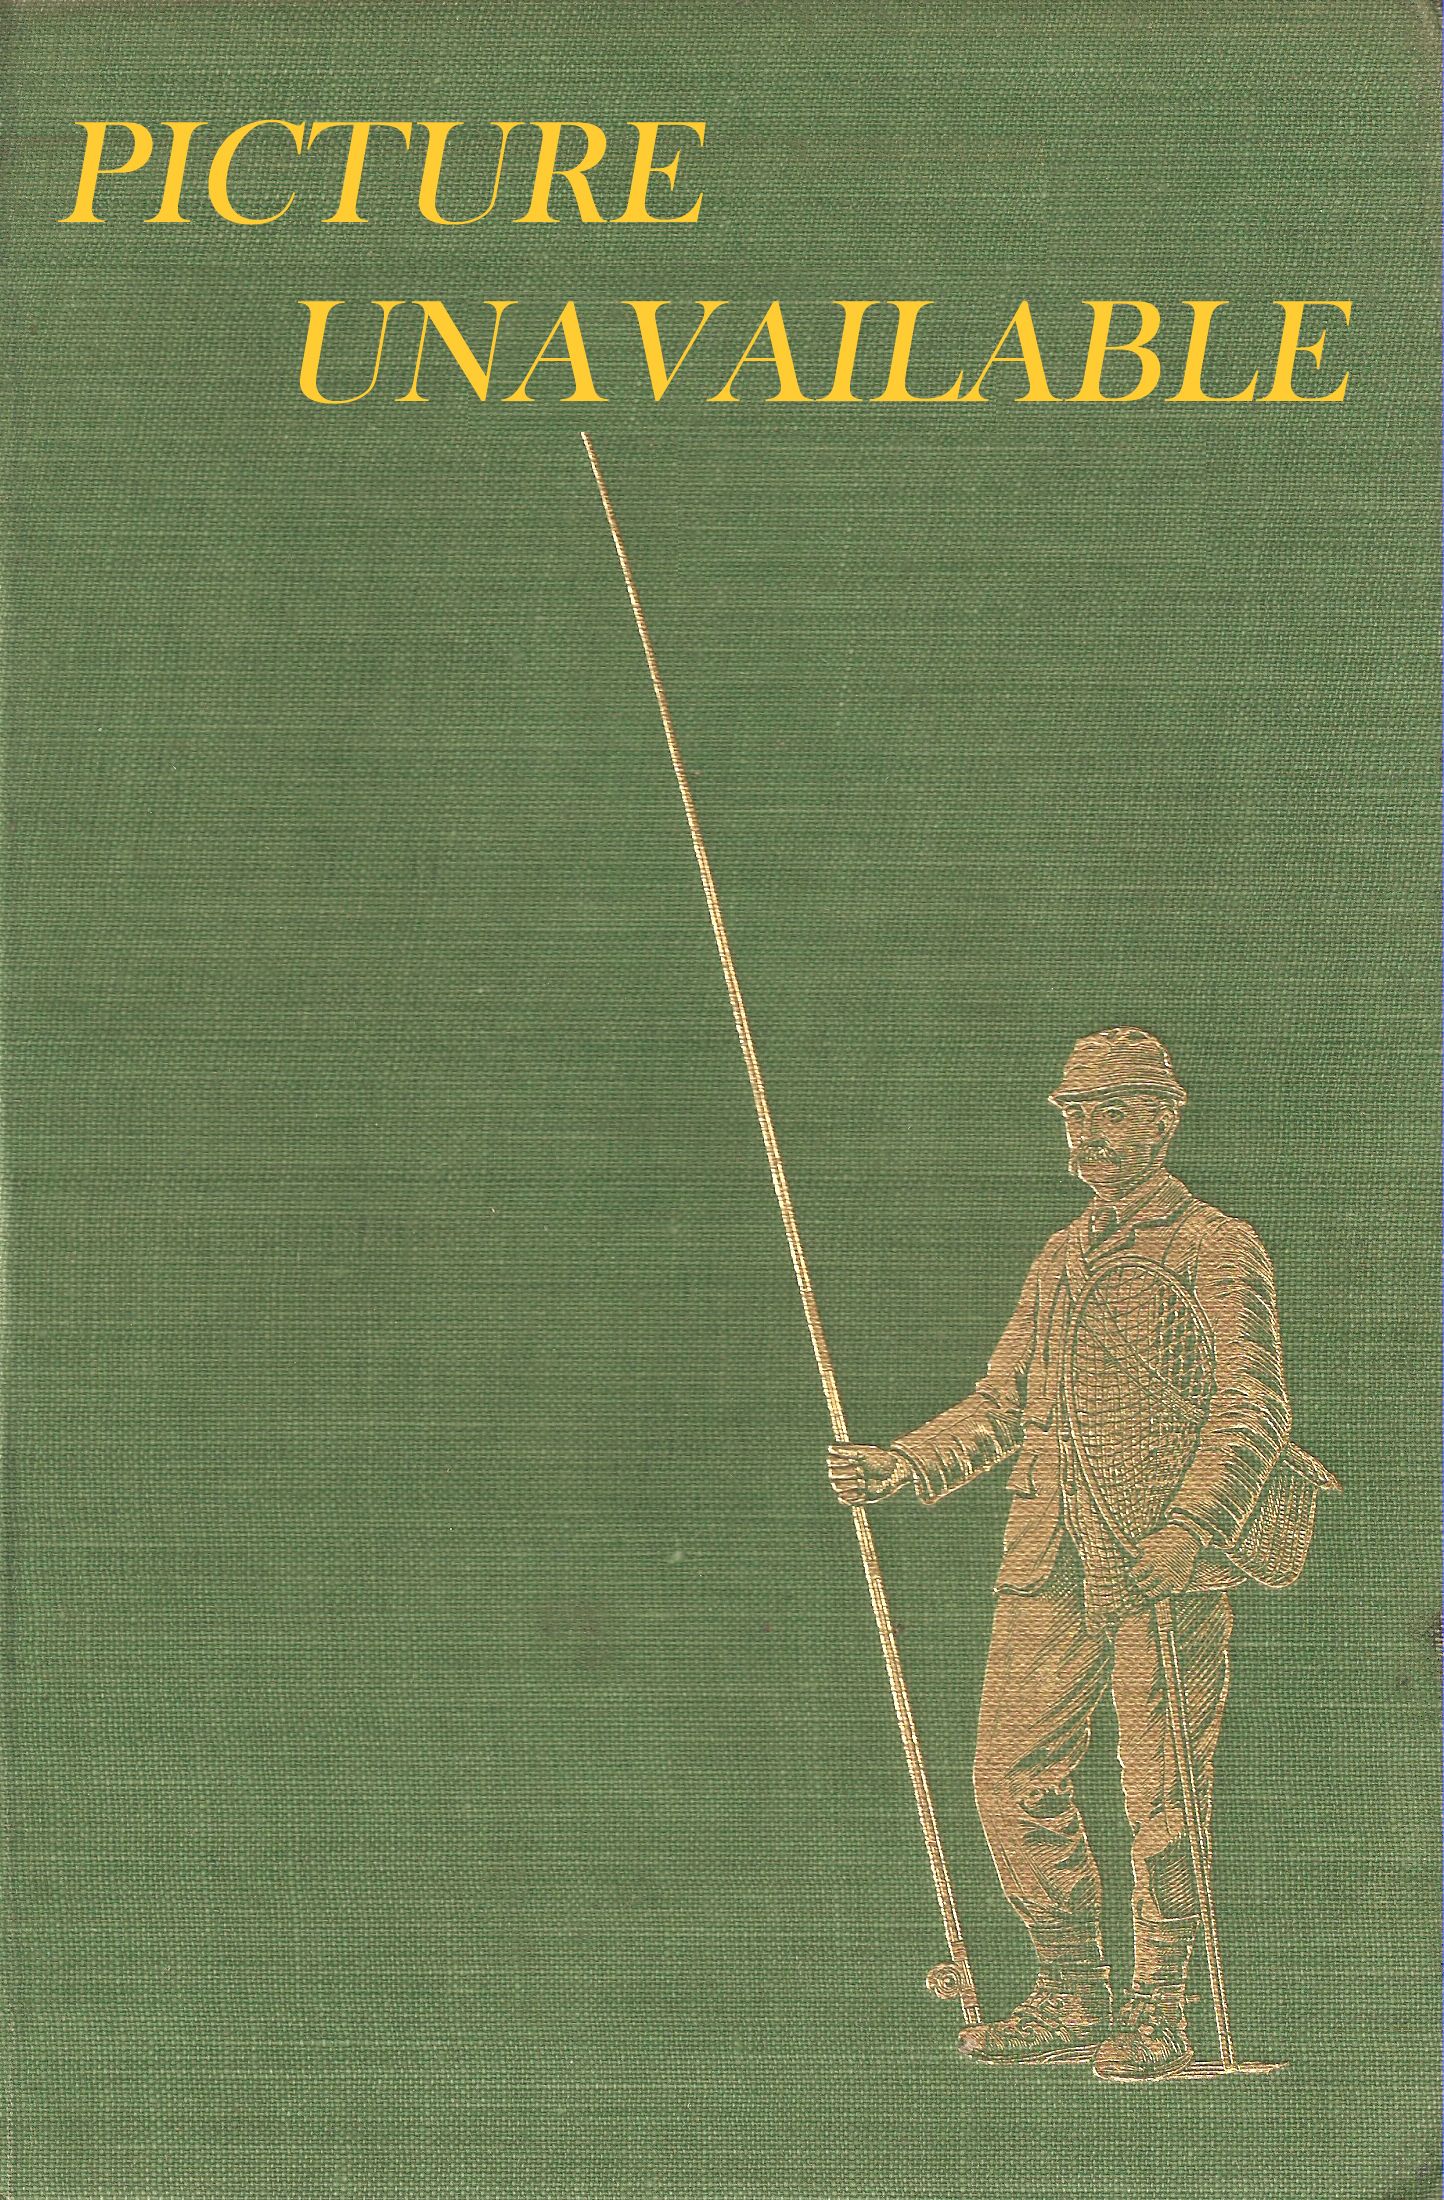 ADVANCED COARSE FISHING. By Graham Marsden. With a foreword by Peter Stone.